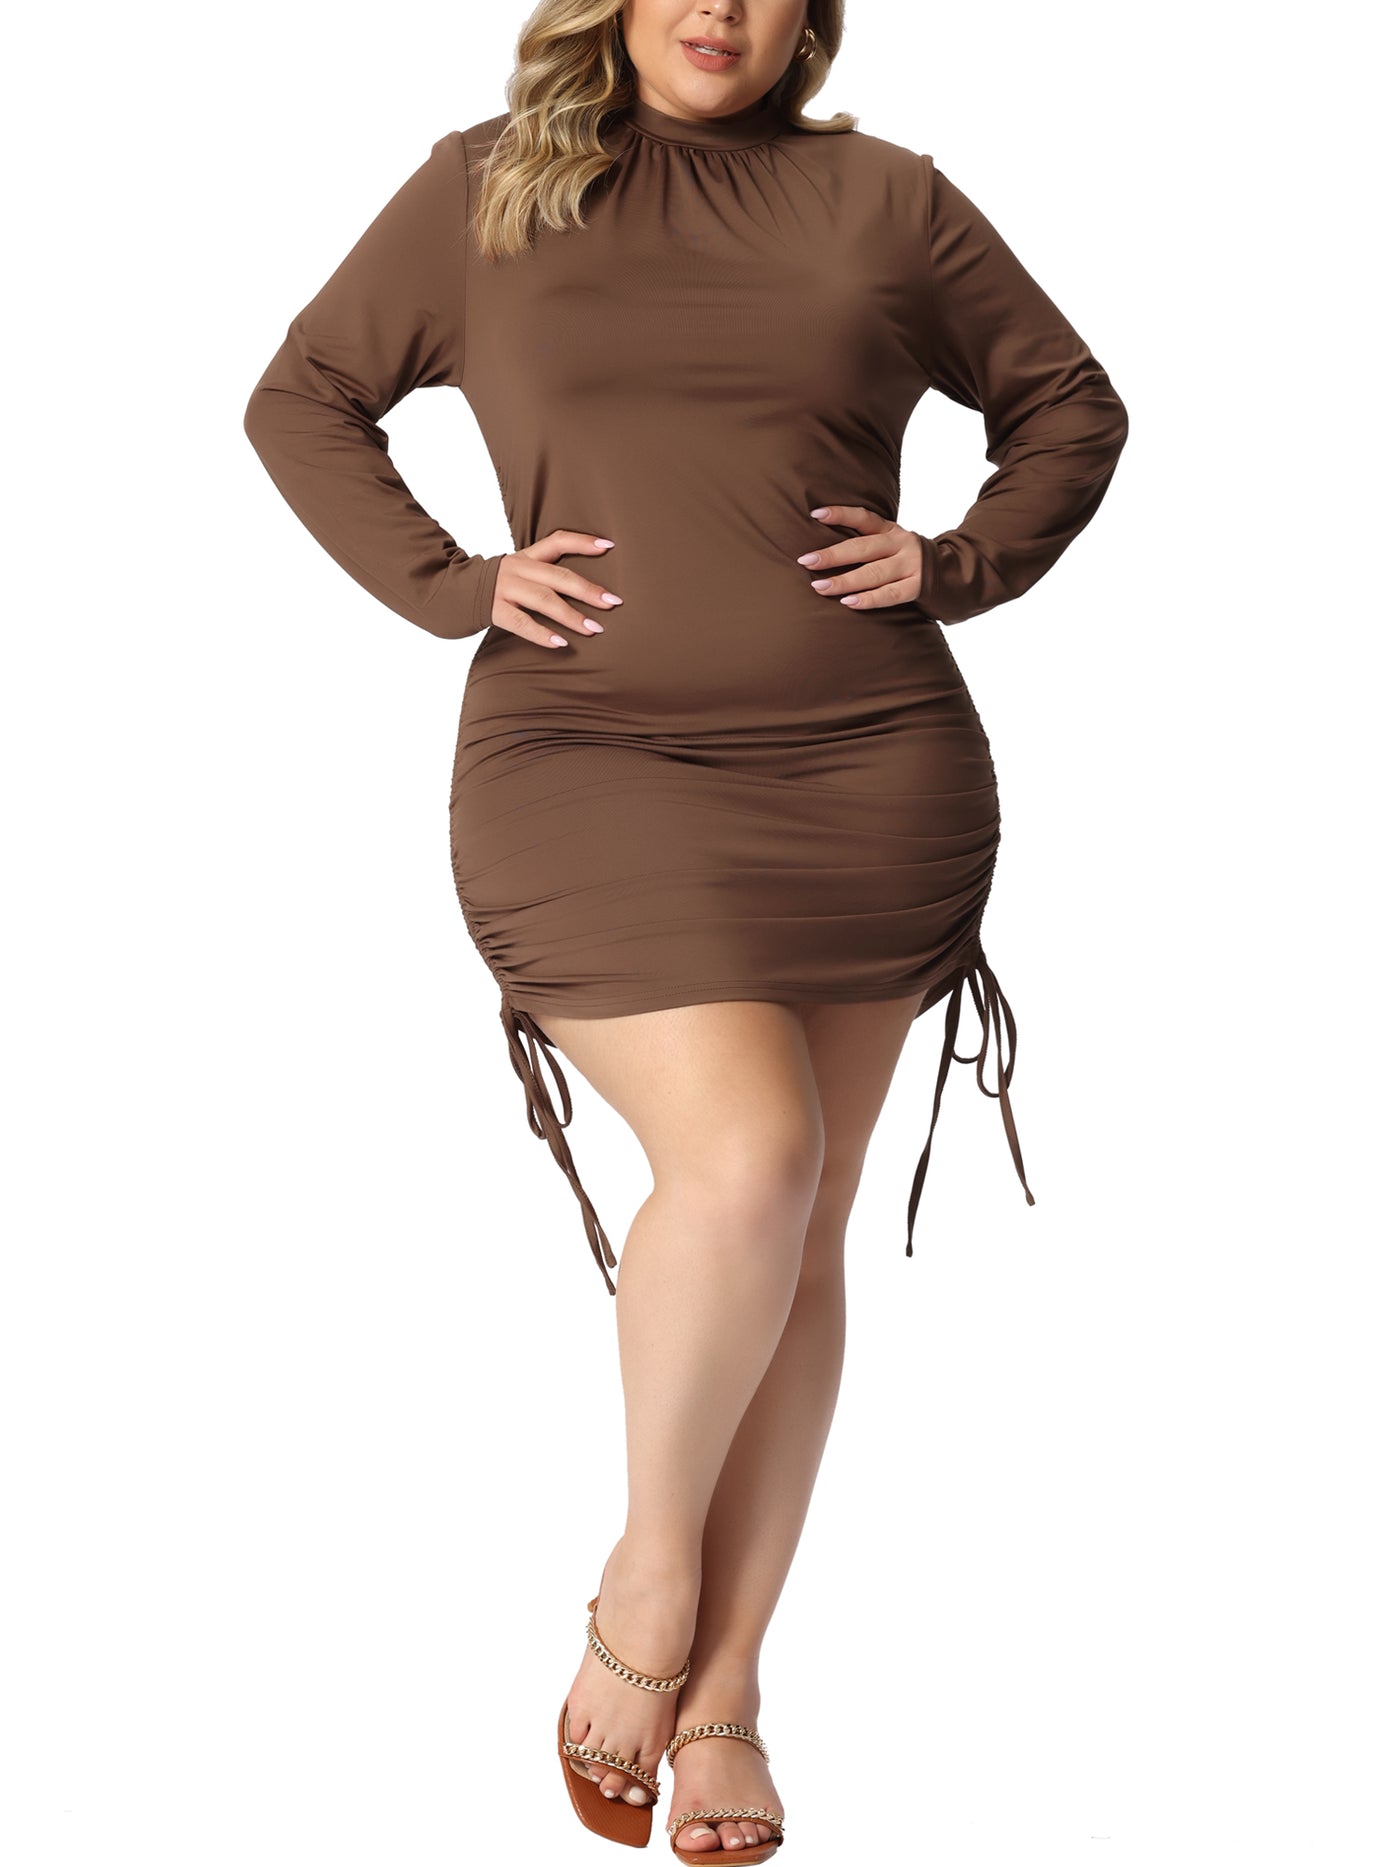 Bublédon Plus Size Bodycon Dress for Women Drawstring Ruched Long Sleeve Party Cocktail Mini Dresses